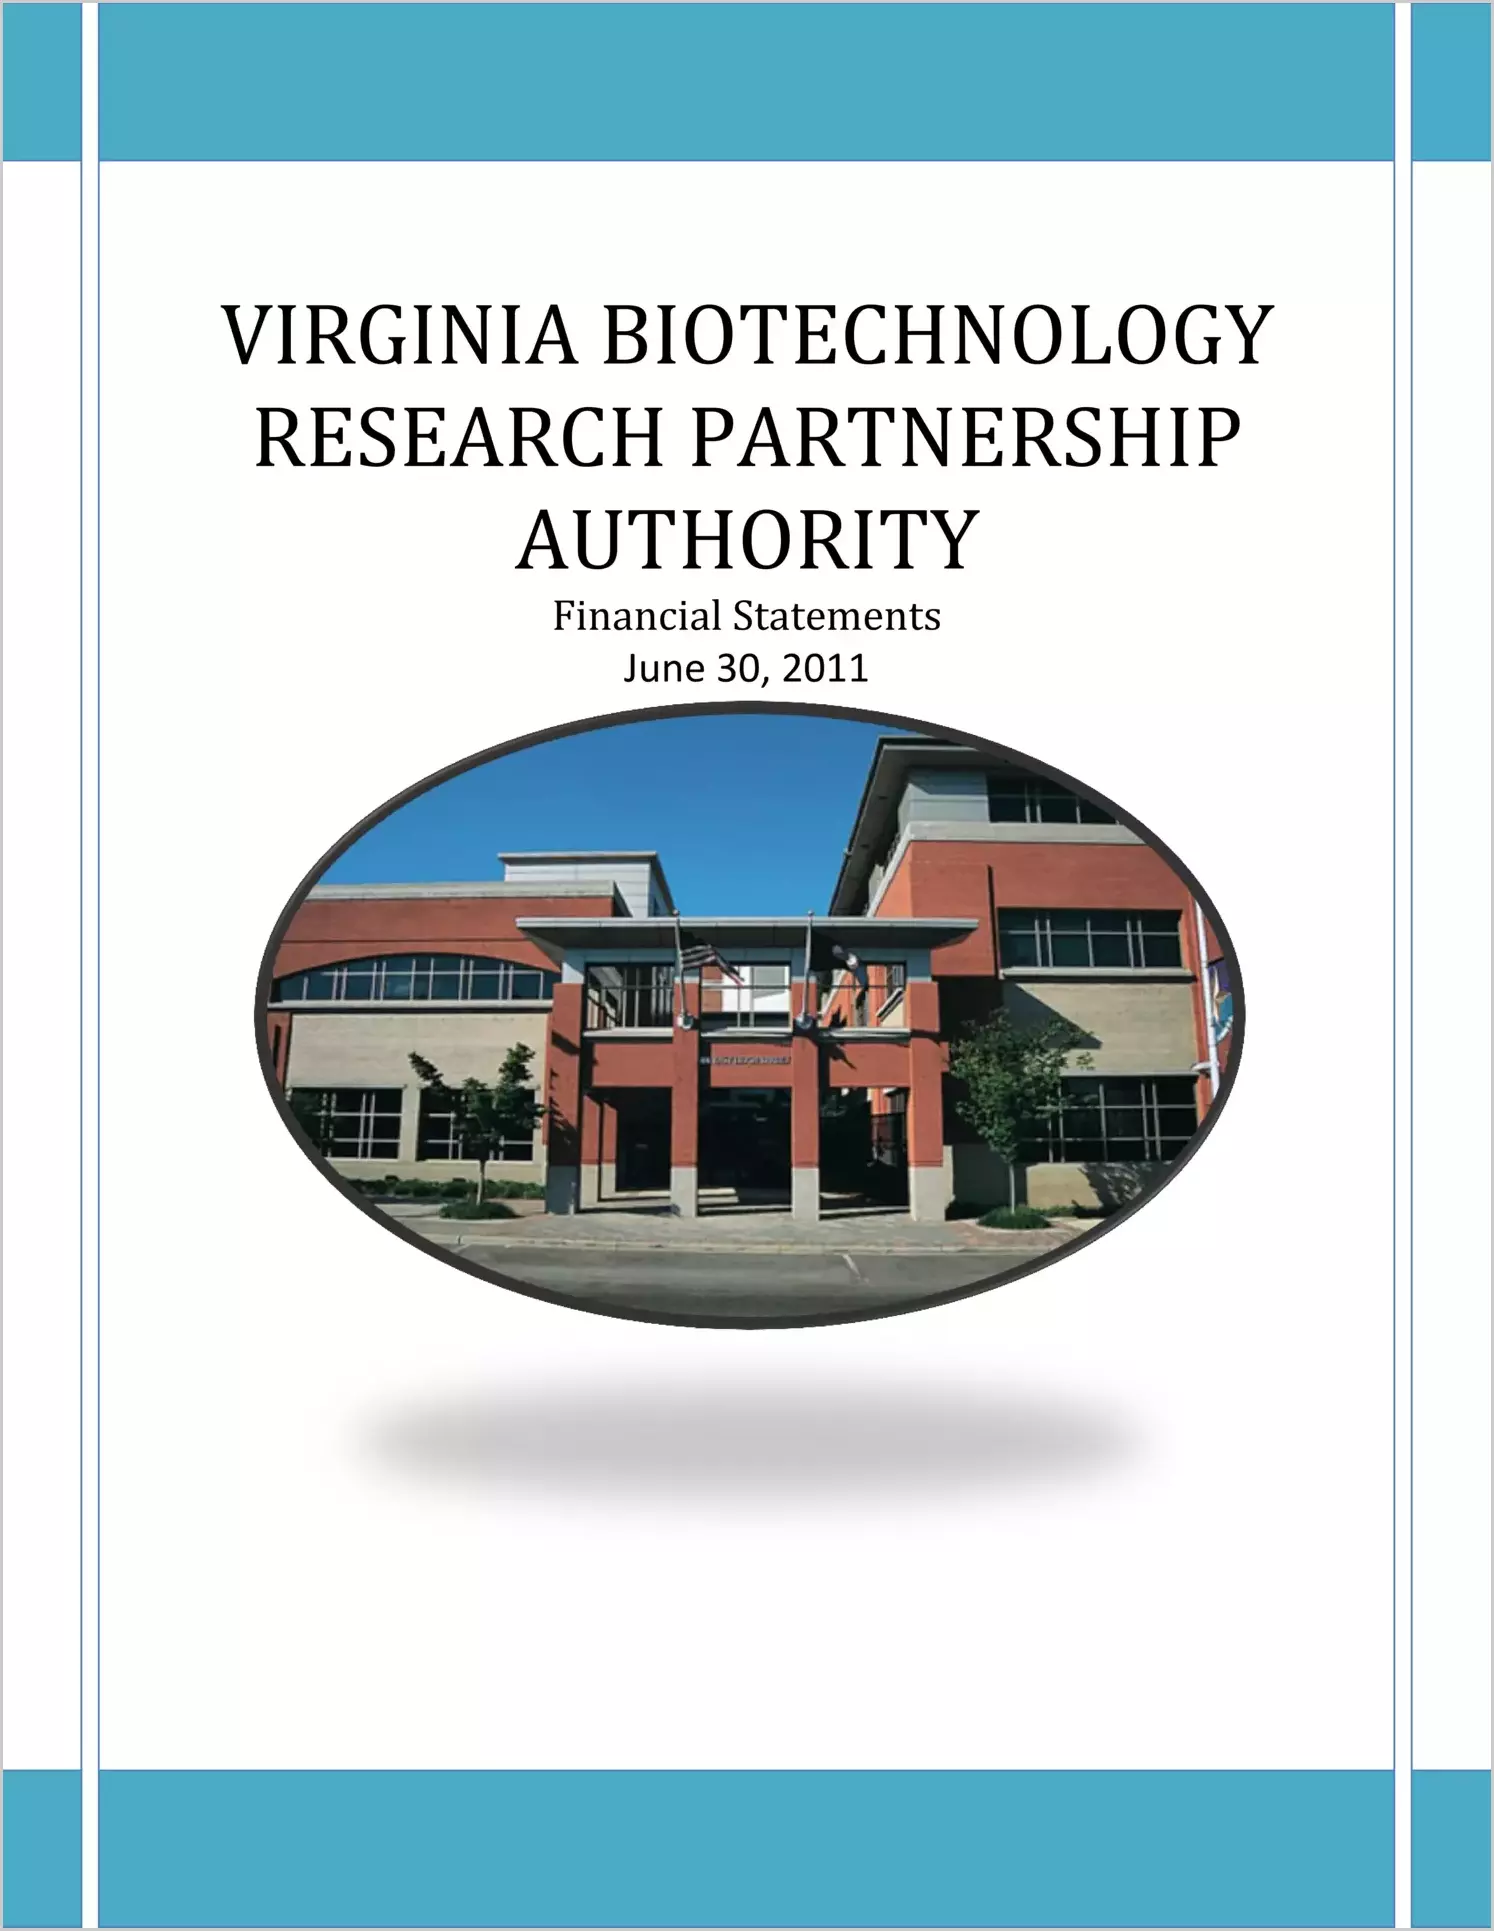 Virginia Biotechnology Research Partnership Authority Financial Statements for the year ended June 30, 2011